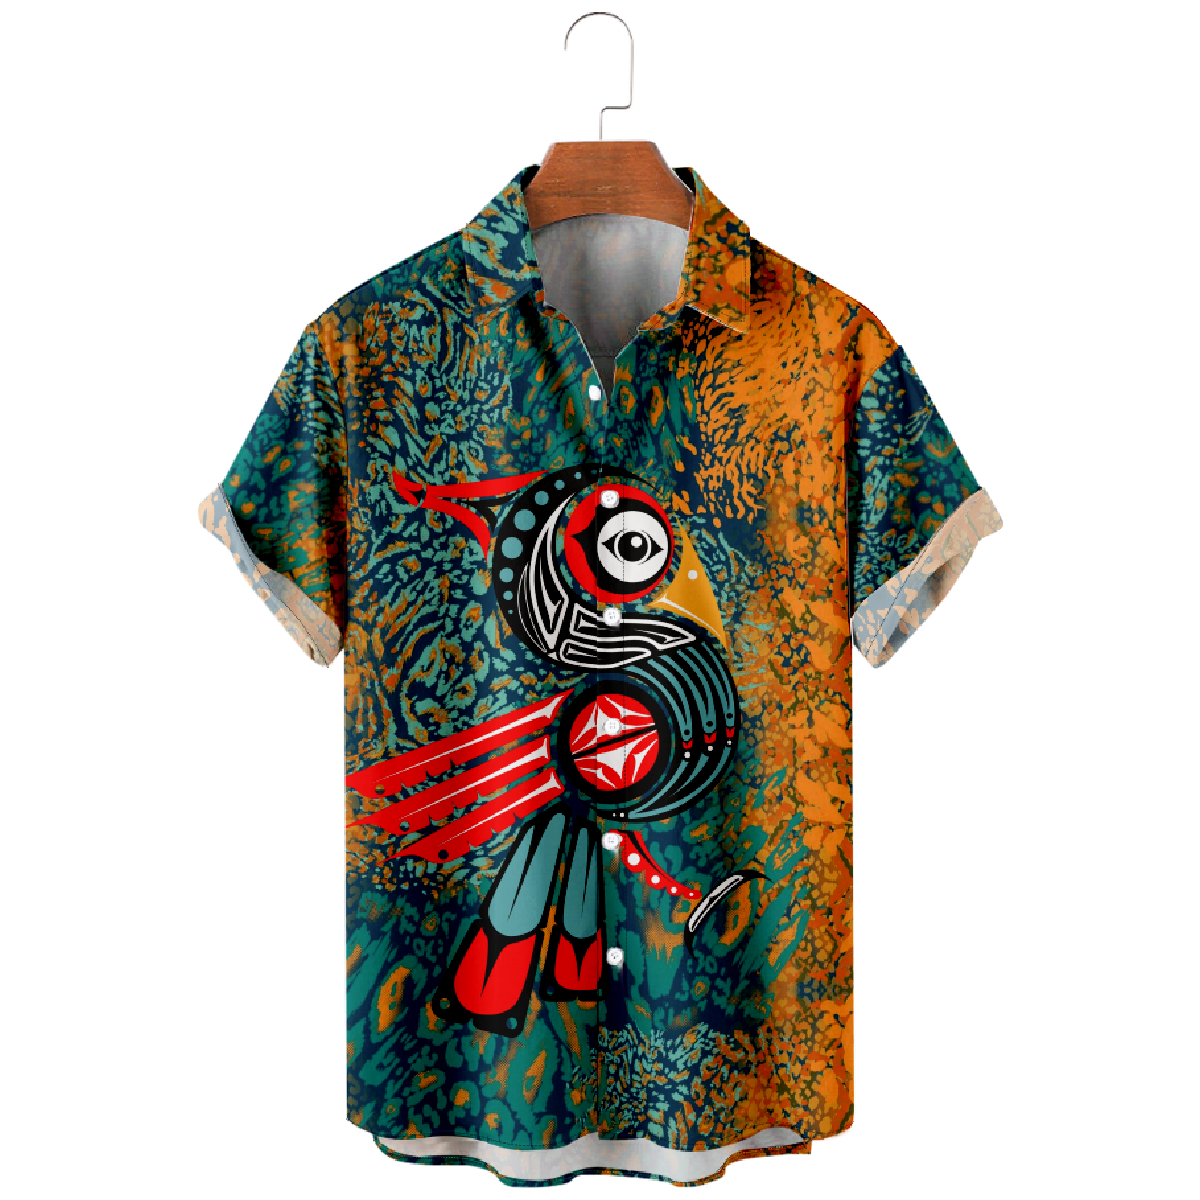 Woodpeckers Button Up Shirt Mens Short Sleeve Shirt Woodpeckers Graphic Print